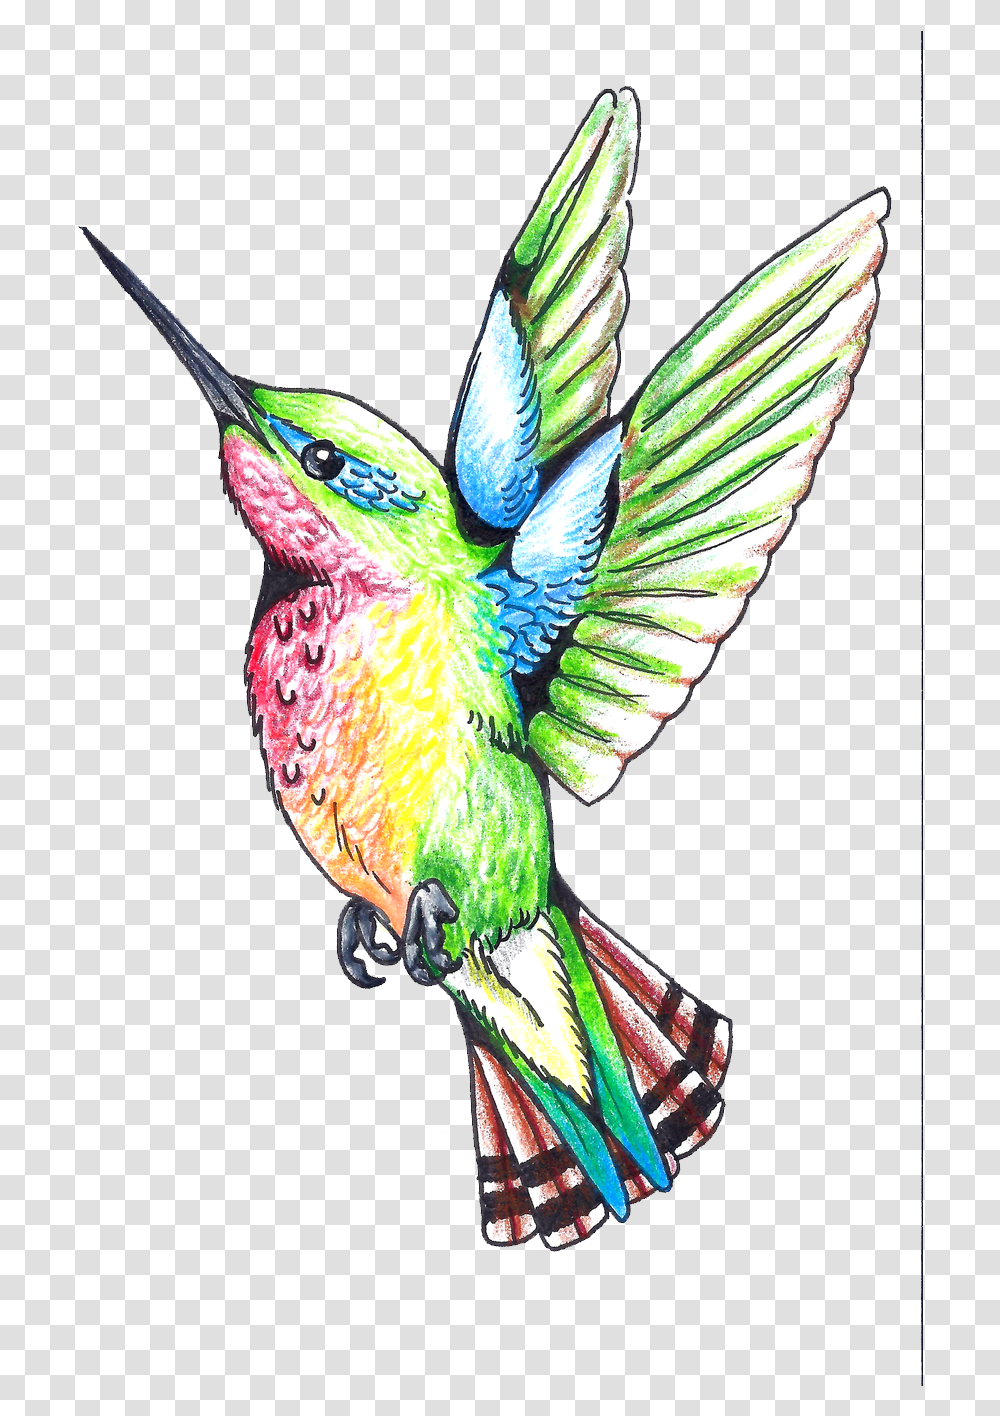 Download Hummingbird Tattoos Clipart Hq Image In Humming Bird Tattoo Design, Bee Eater, Animal Transparent Png